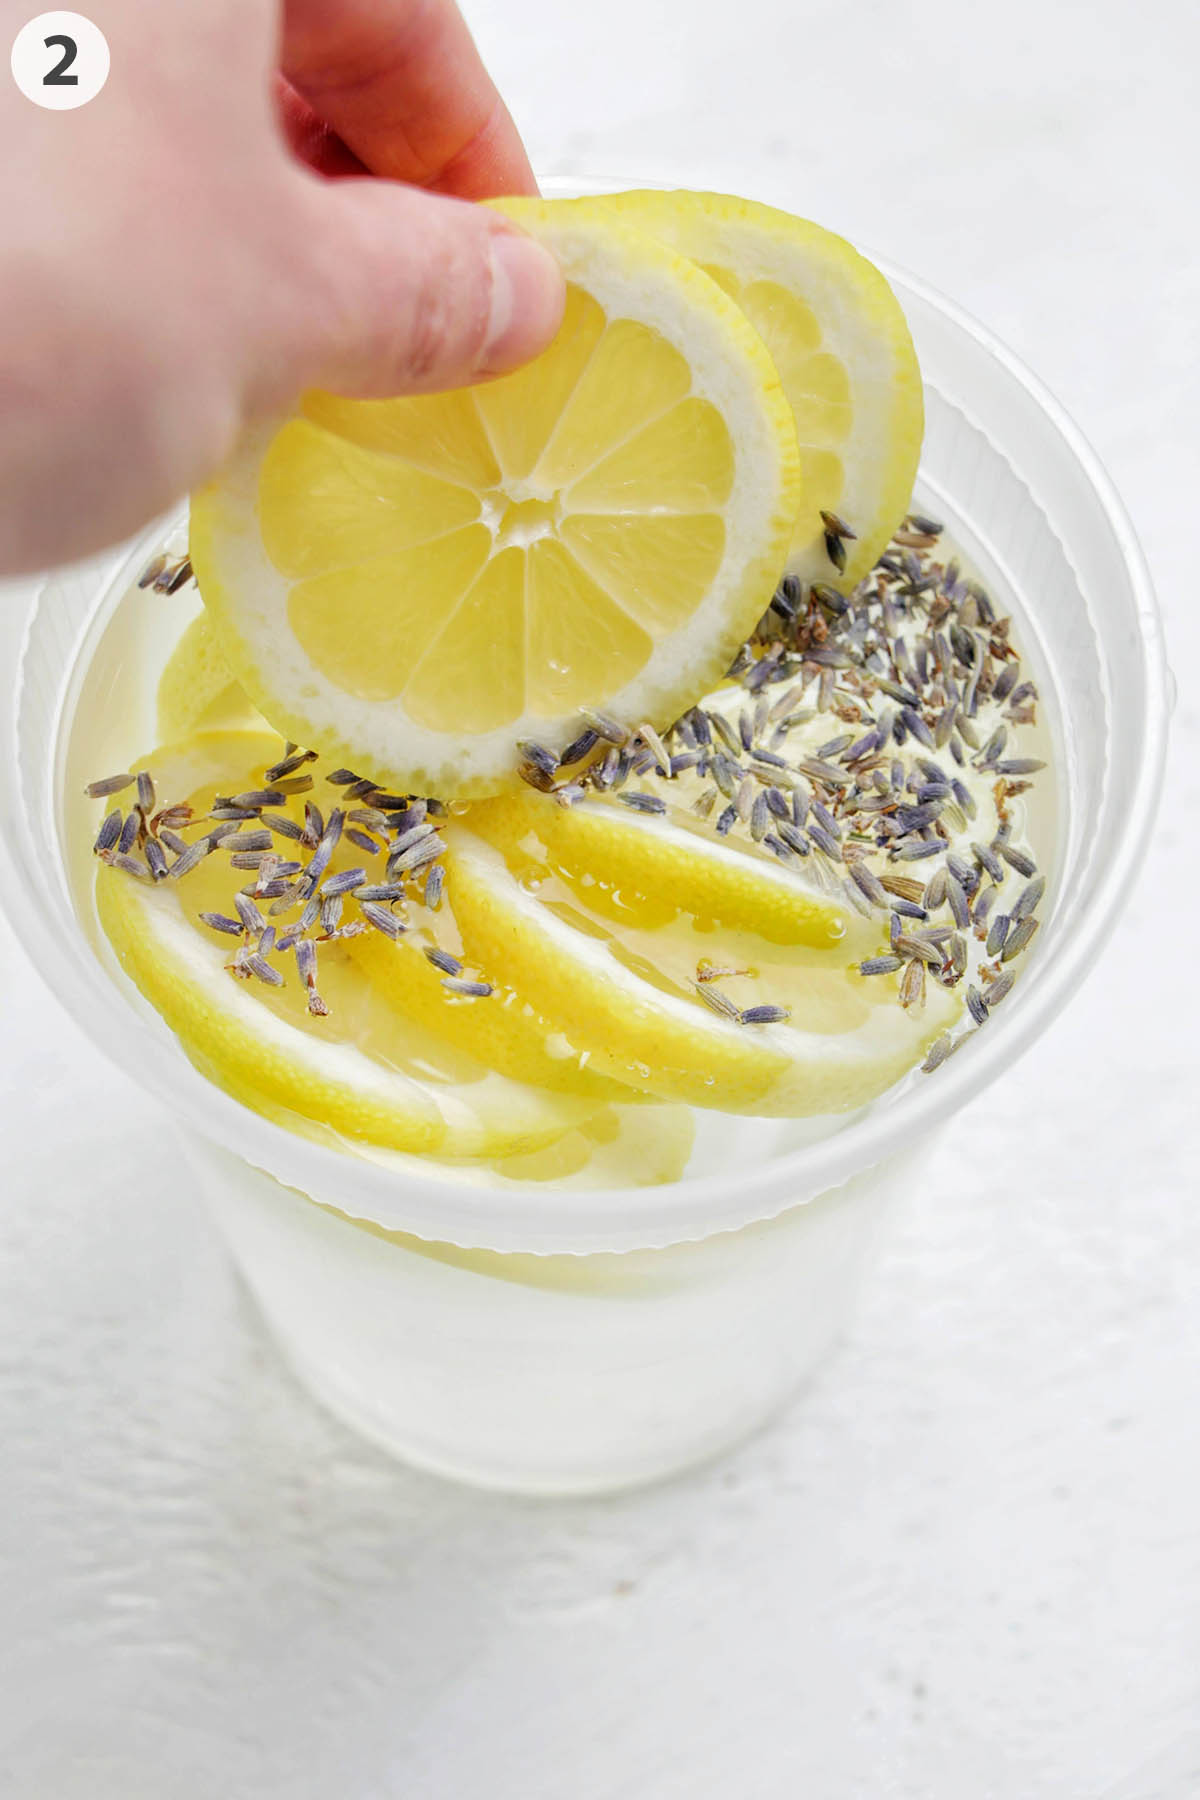 numbered photo showing a hand placing lemons into a container with vodka and lavender.